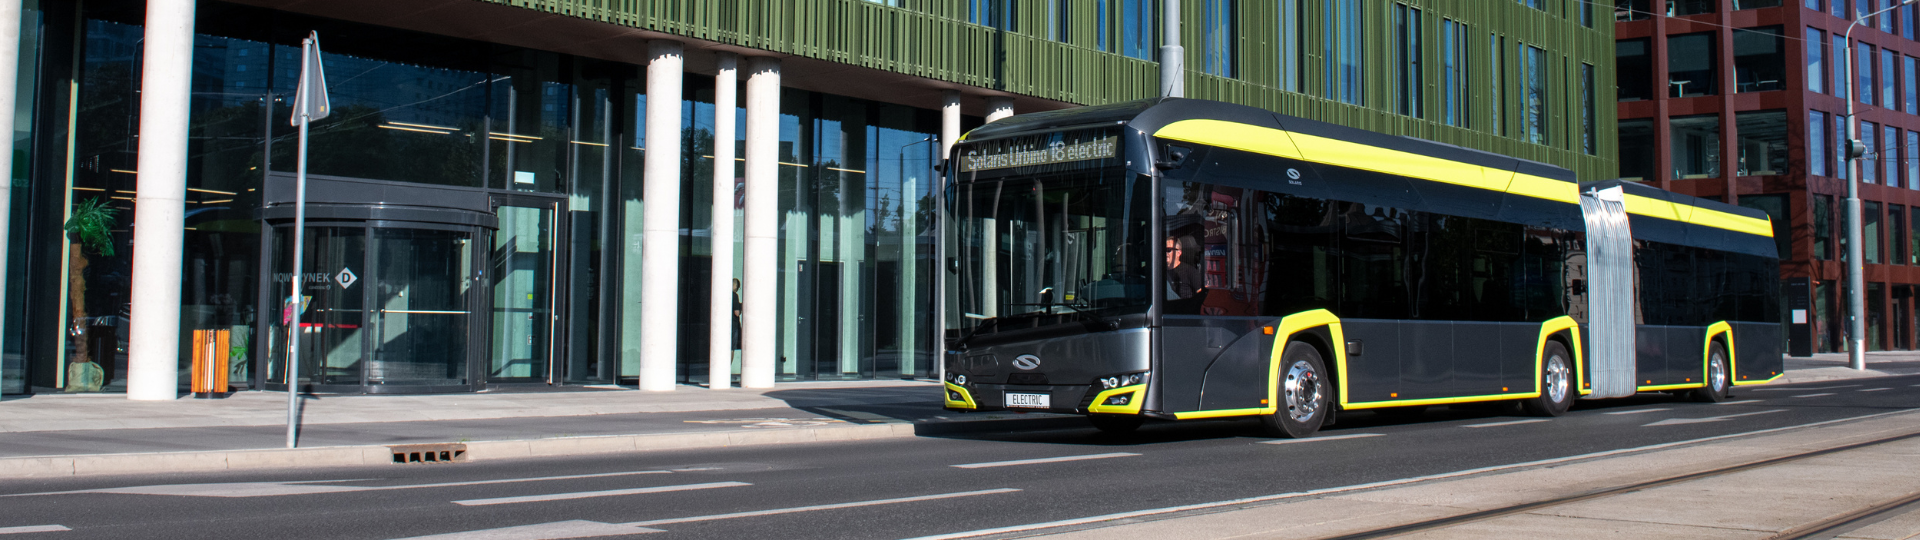 Solaris with an order from BVG Berlin for 50 electric buses